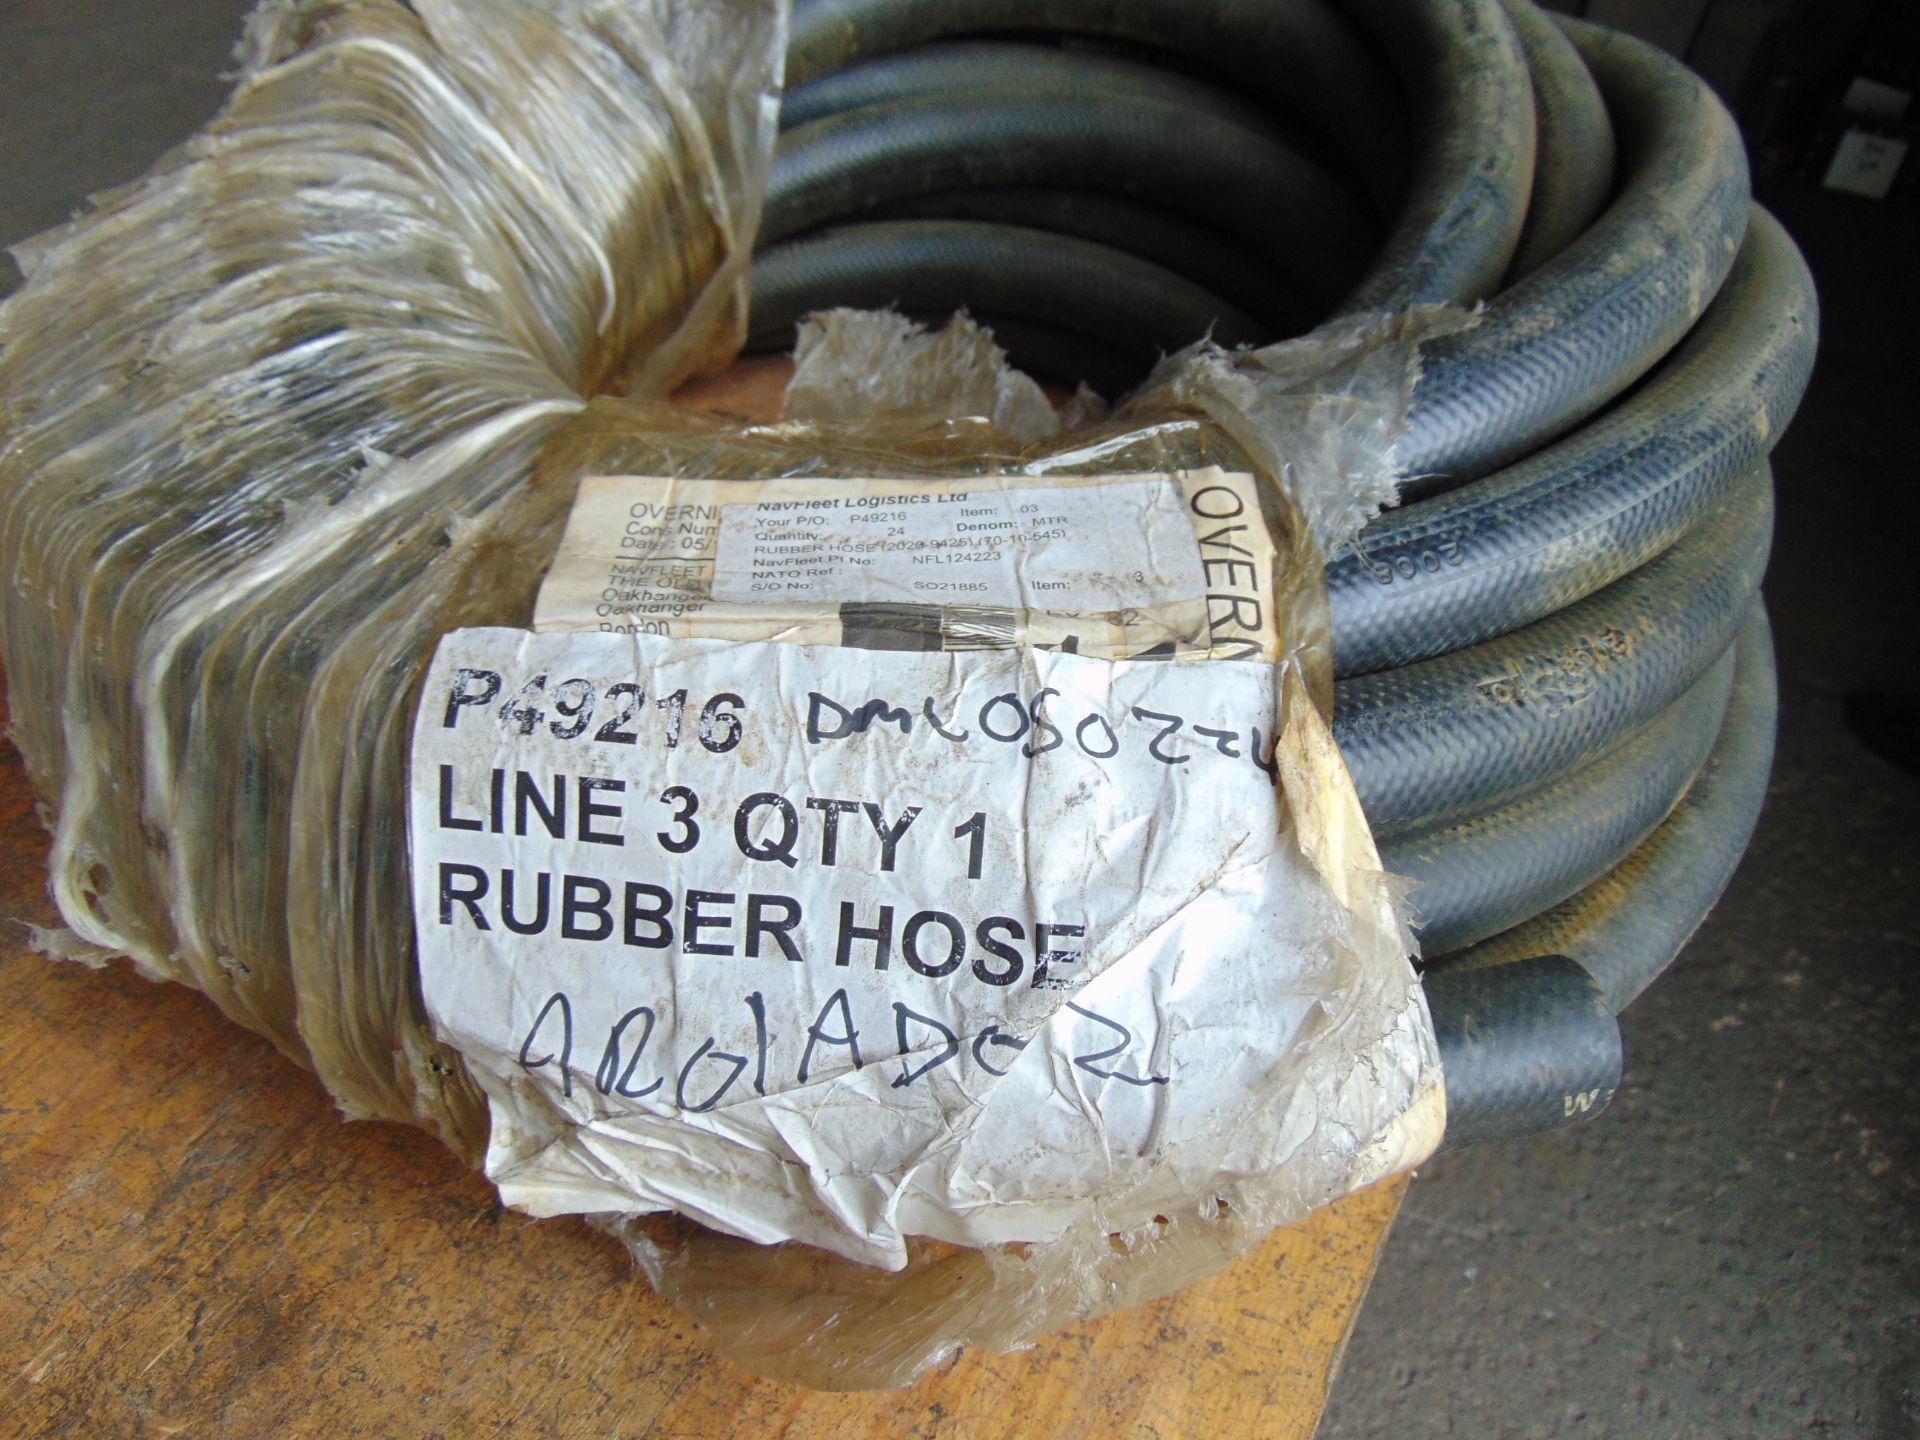 New Unissued 24m Roll 25mm Rubber Hose - Image 4 of 5